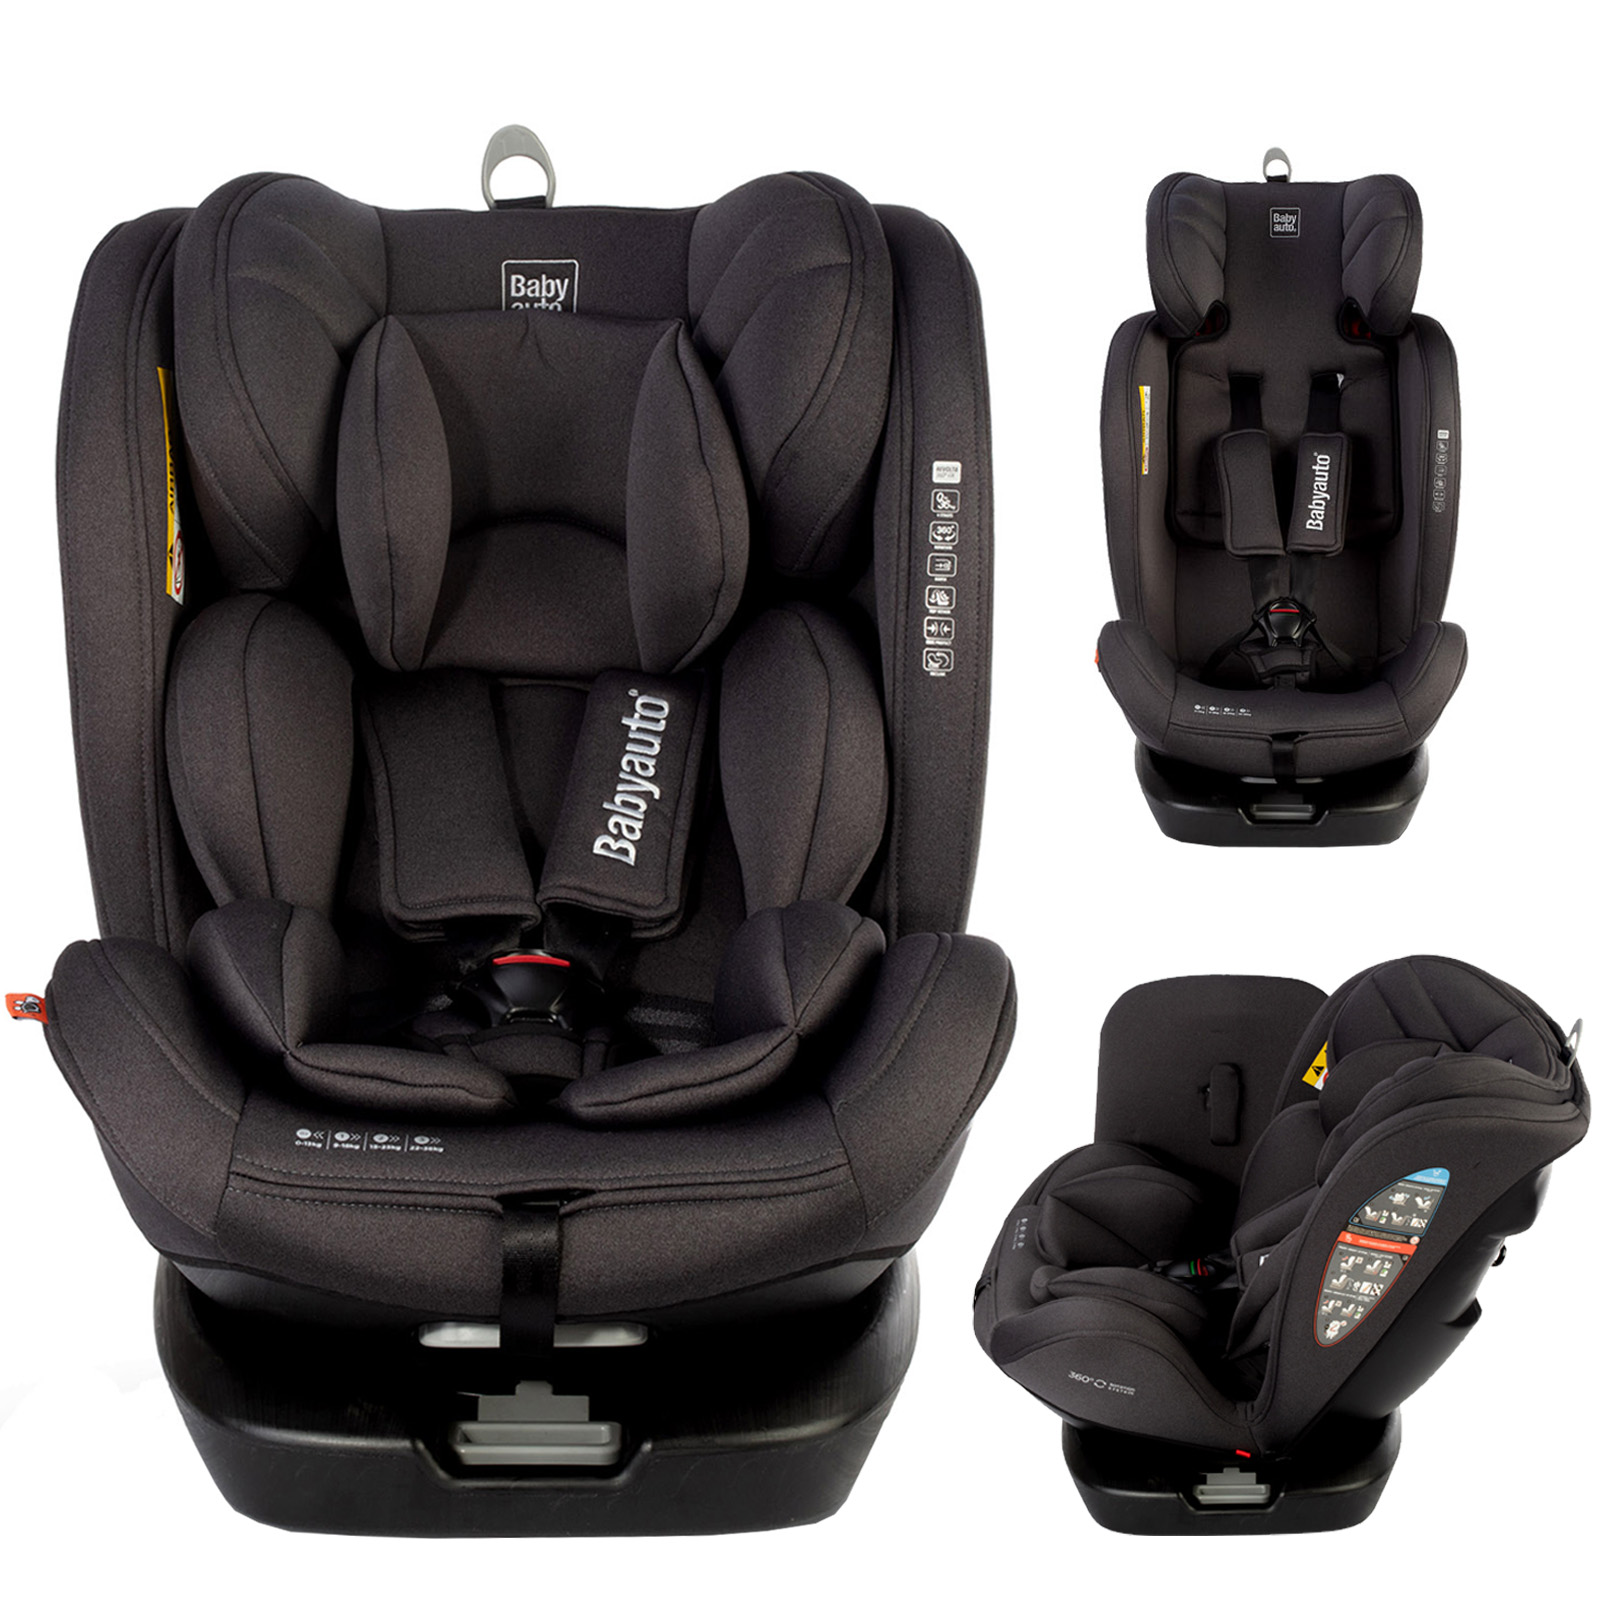 360 spin isofix car seat